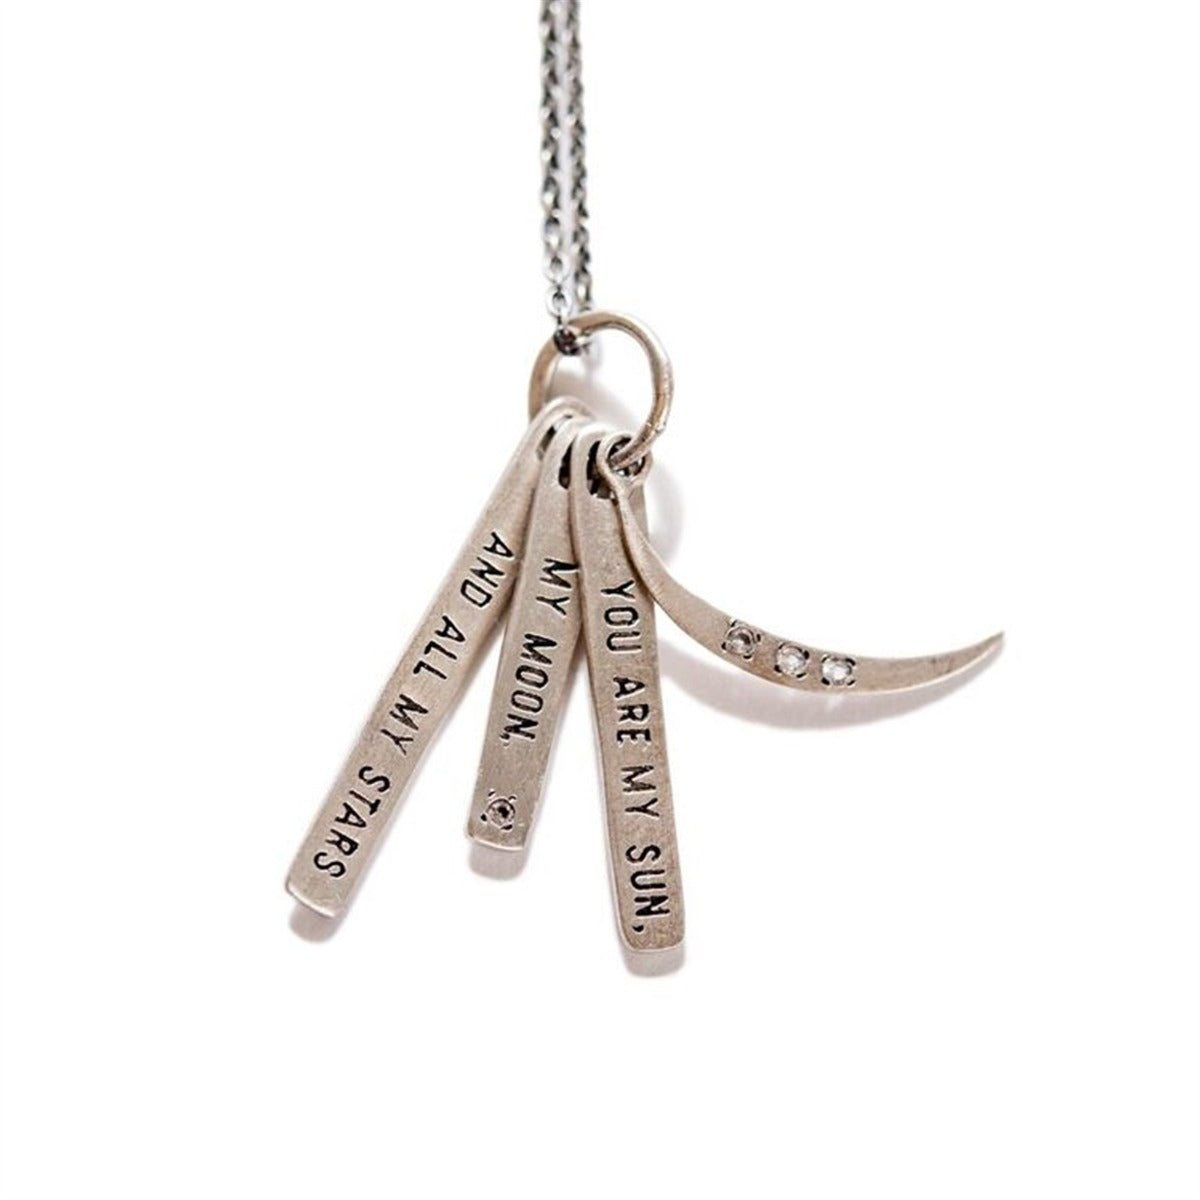 Messages Of Love Necklace by Rebecca Puig and Sugarboo